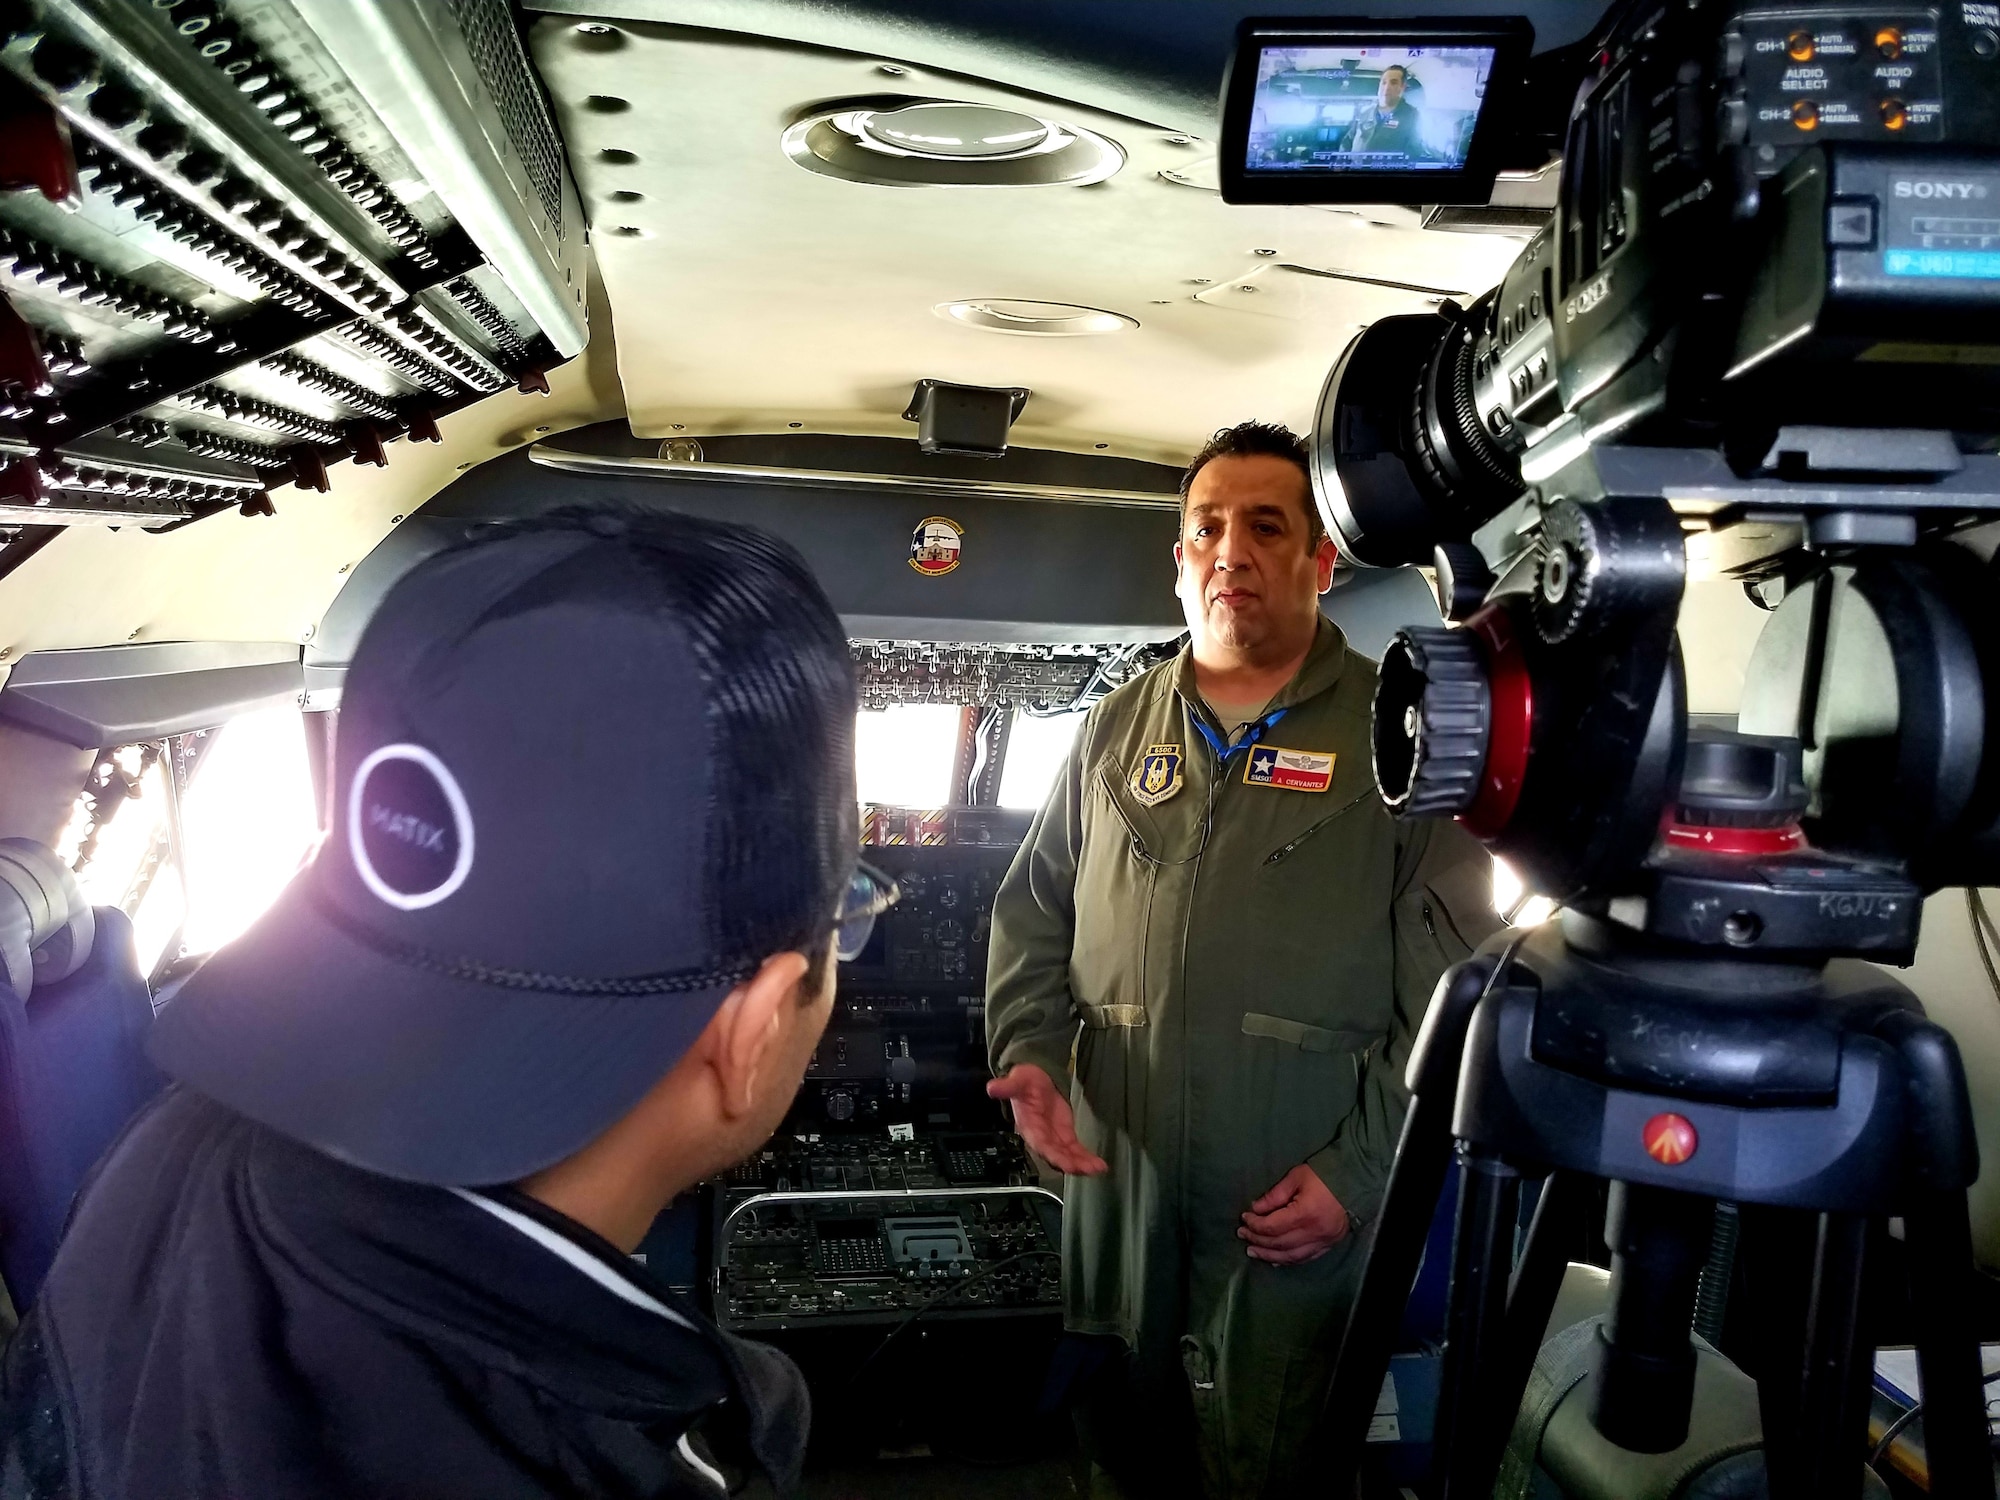 Senior Master Sgt. Alfonso Cervantes, 68th Airlift Squadron loadmaster, speaks with a local television station crew in both English and Spanish while in the cockpit of the 433rd Airlift Wing’s C-5M Super Galaxy from Joint Base San Antonio-Lackland, Texas at the Laredo International Airport in Laredo, Texas Feb. 17, 2019.